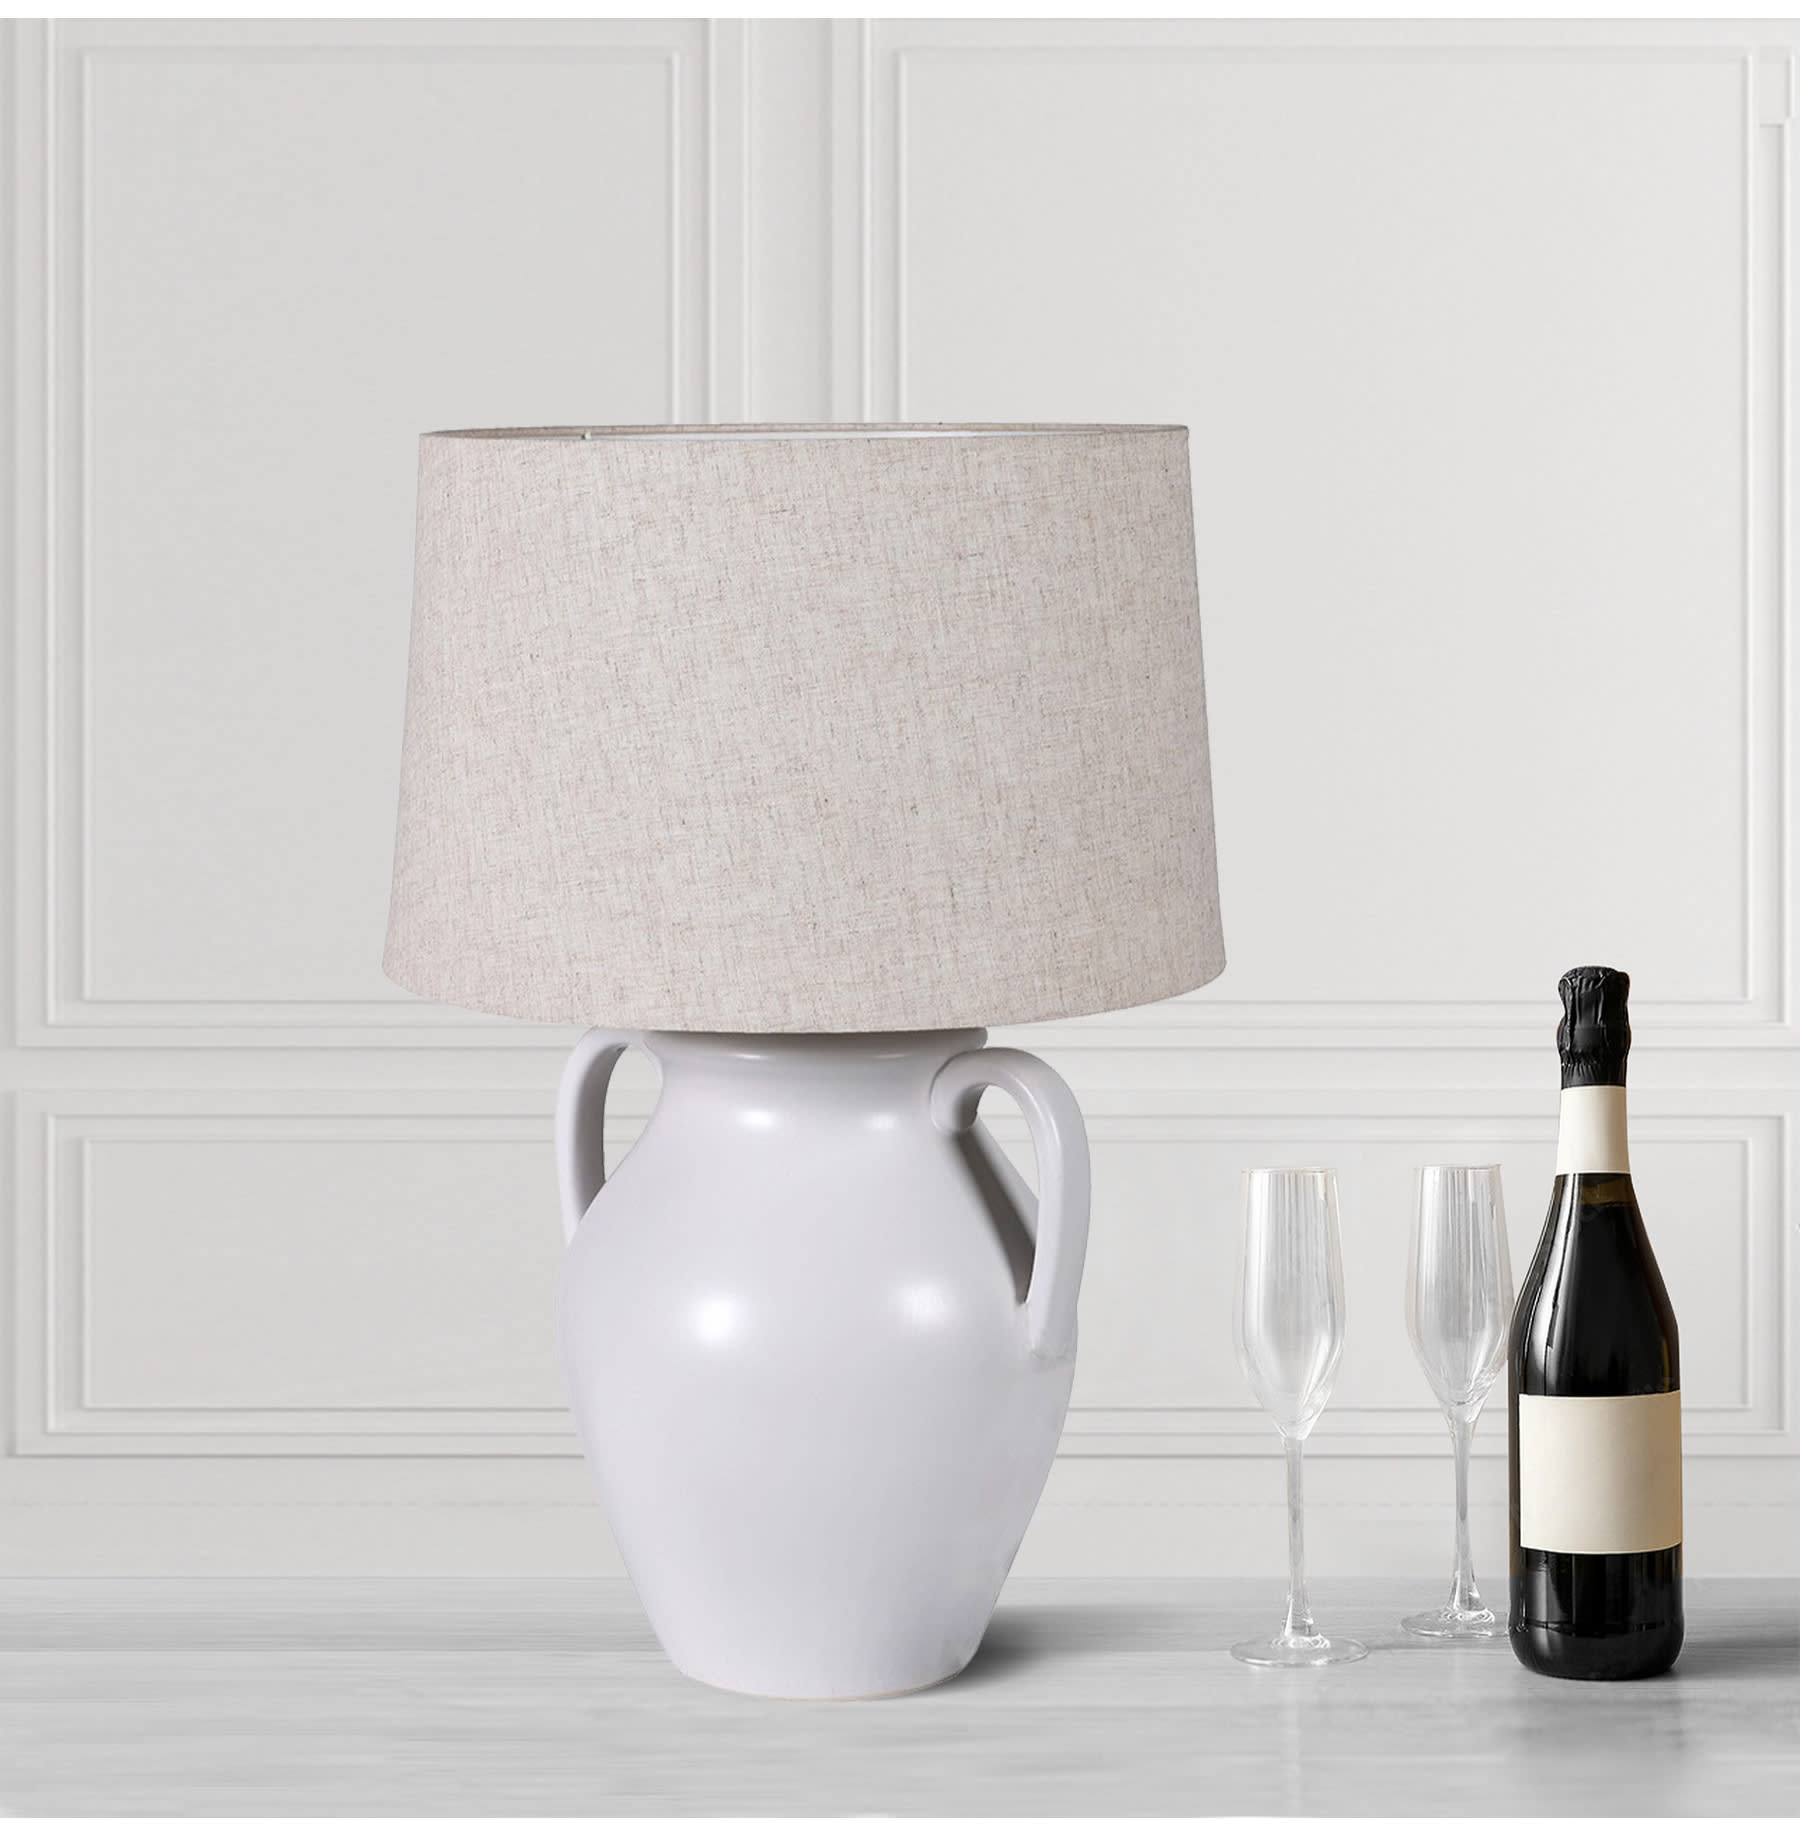 White Ceramic Table Lamp with Handles